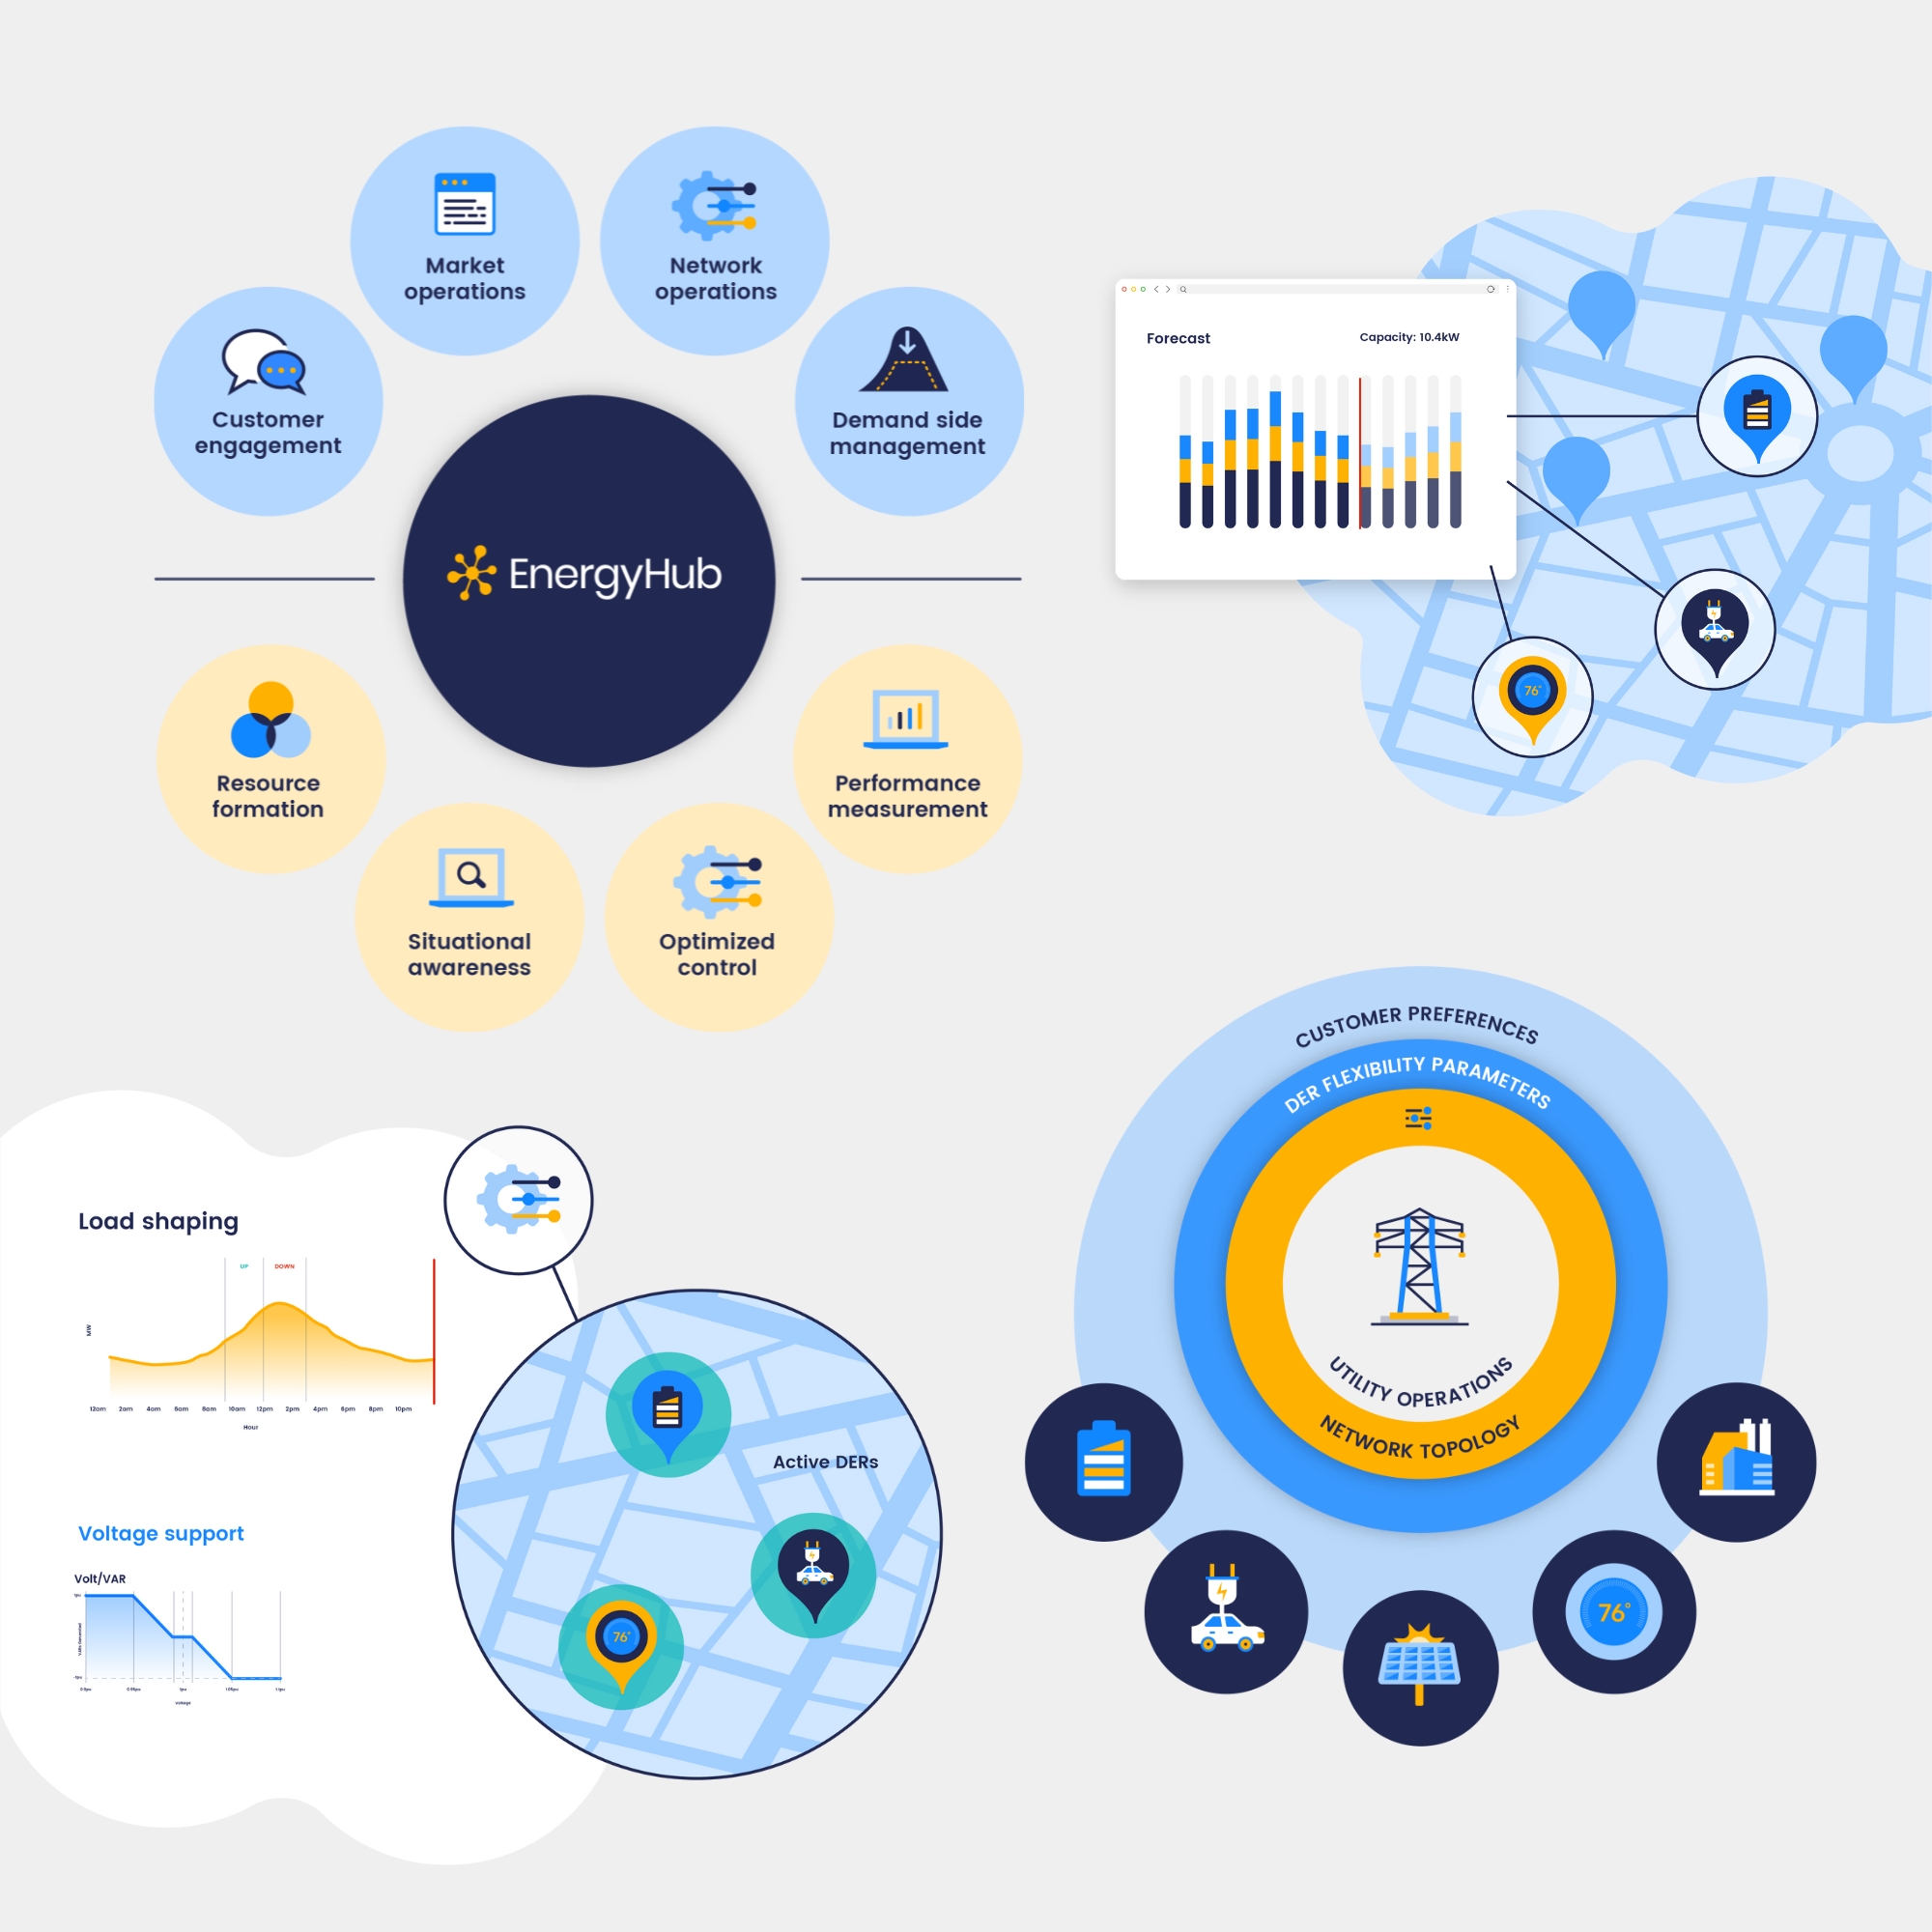 Image features 4 x EnergyHub infographics in brand blues and yellows on a light grey background.